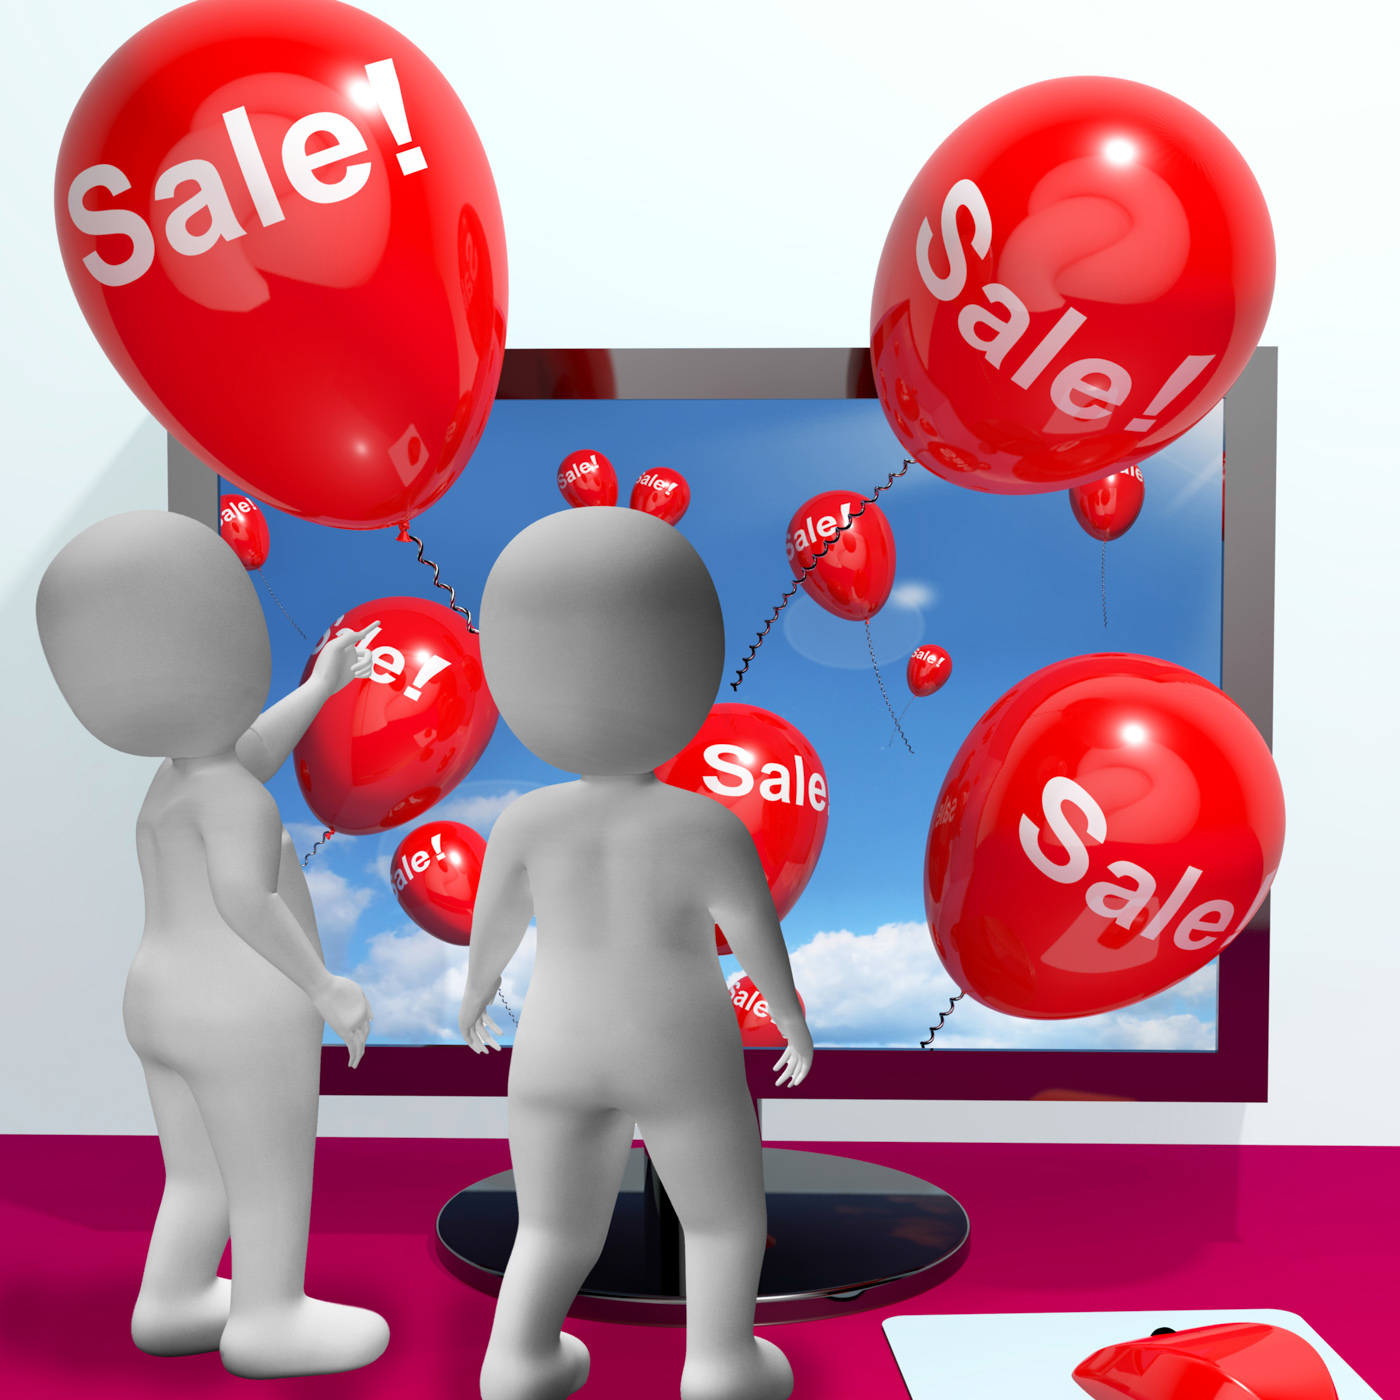 Sale Balloons Coming From Computer Showing Internet Promotion And Redu, Balloons, Promotion, Web, Sky, HQ Photo